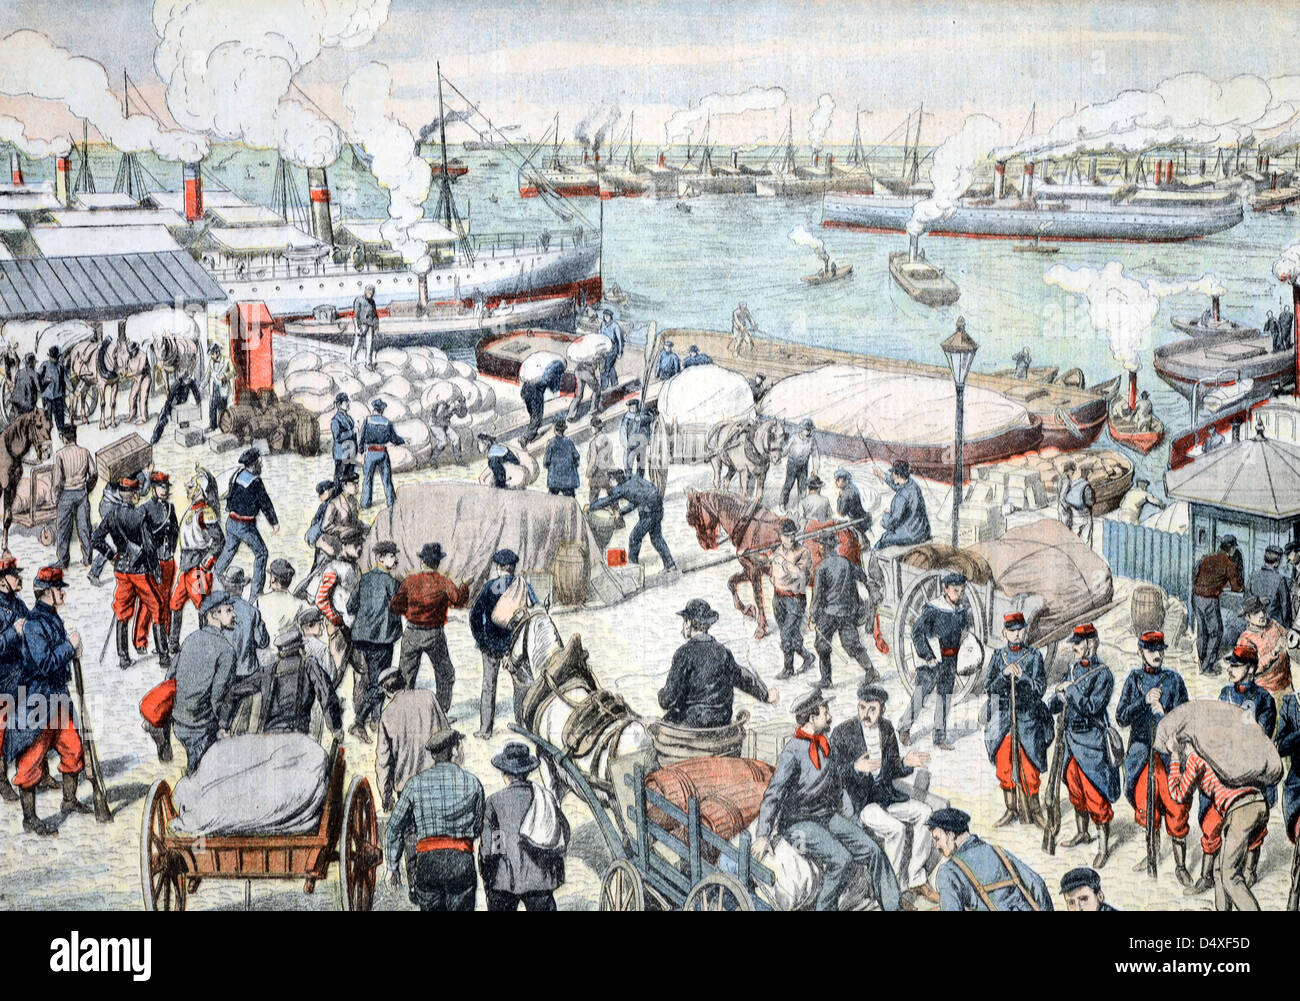 Vintage or Old Illustration of the Aftermath of a Dock Workers Strike when Dockers Return to Work in Port of Marseille France (Oct 1904) Stock Photo